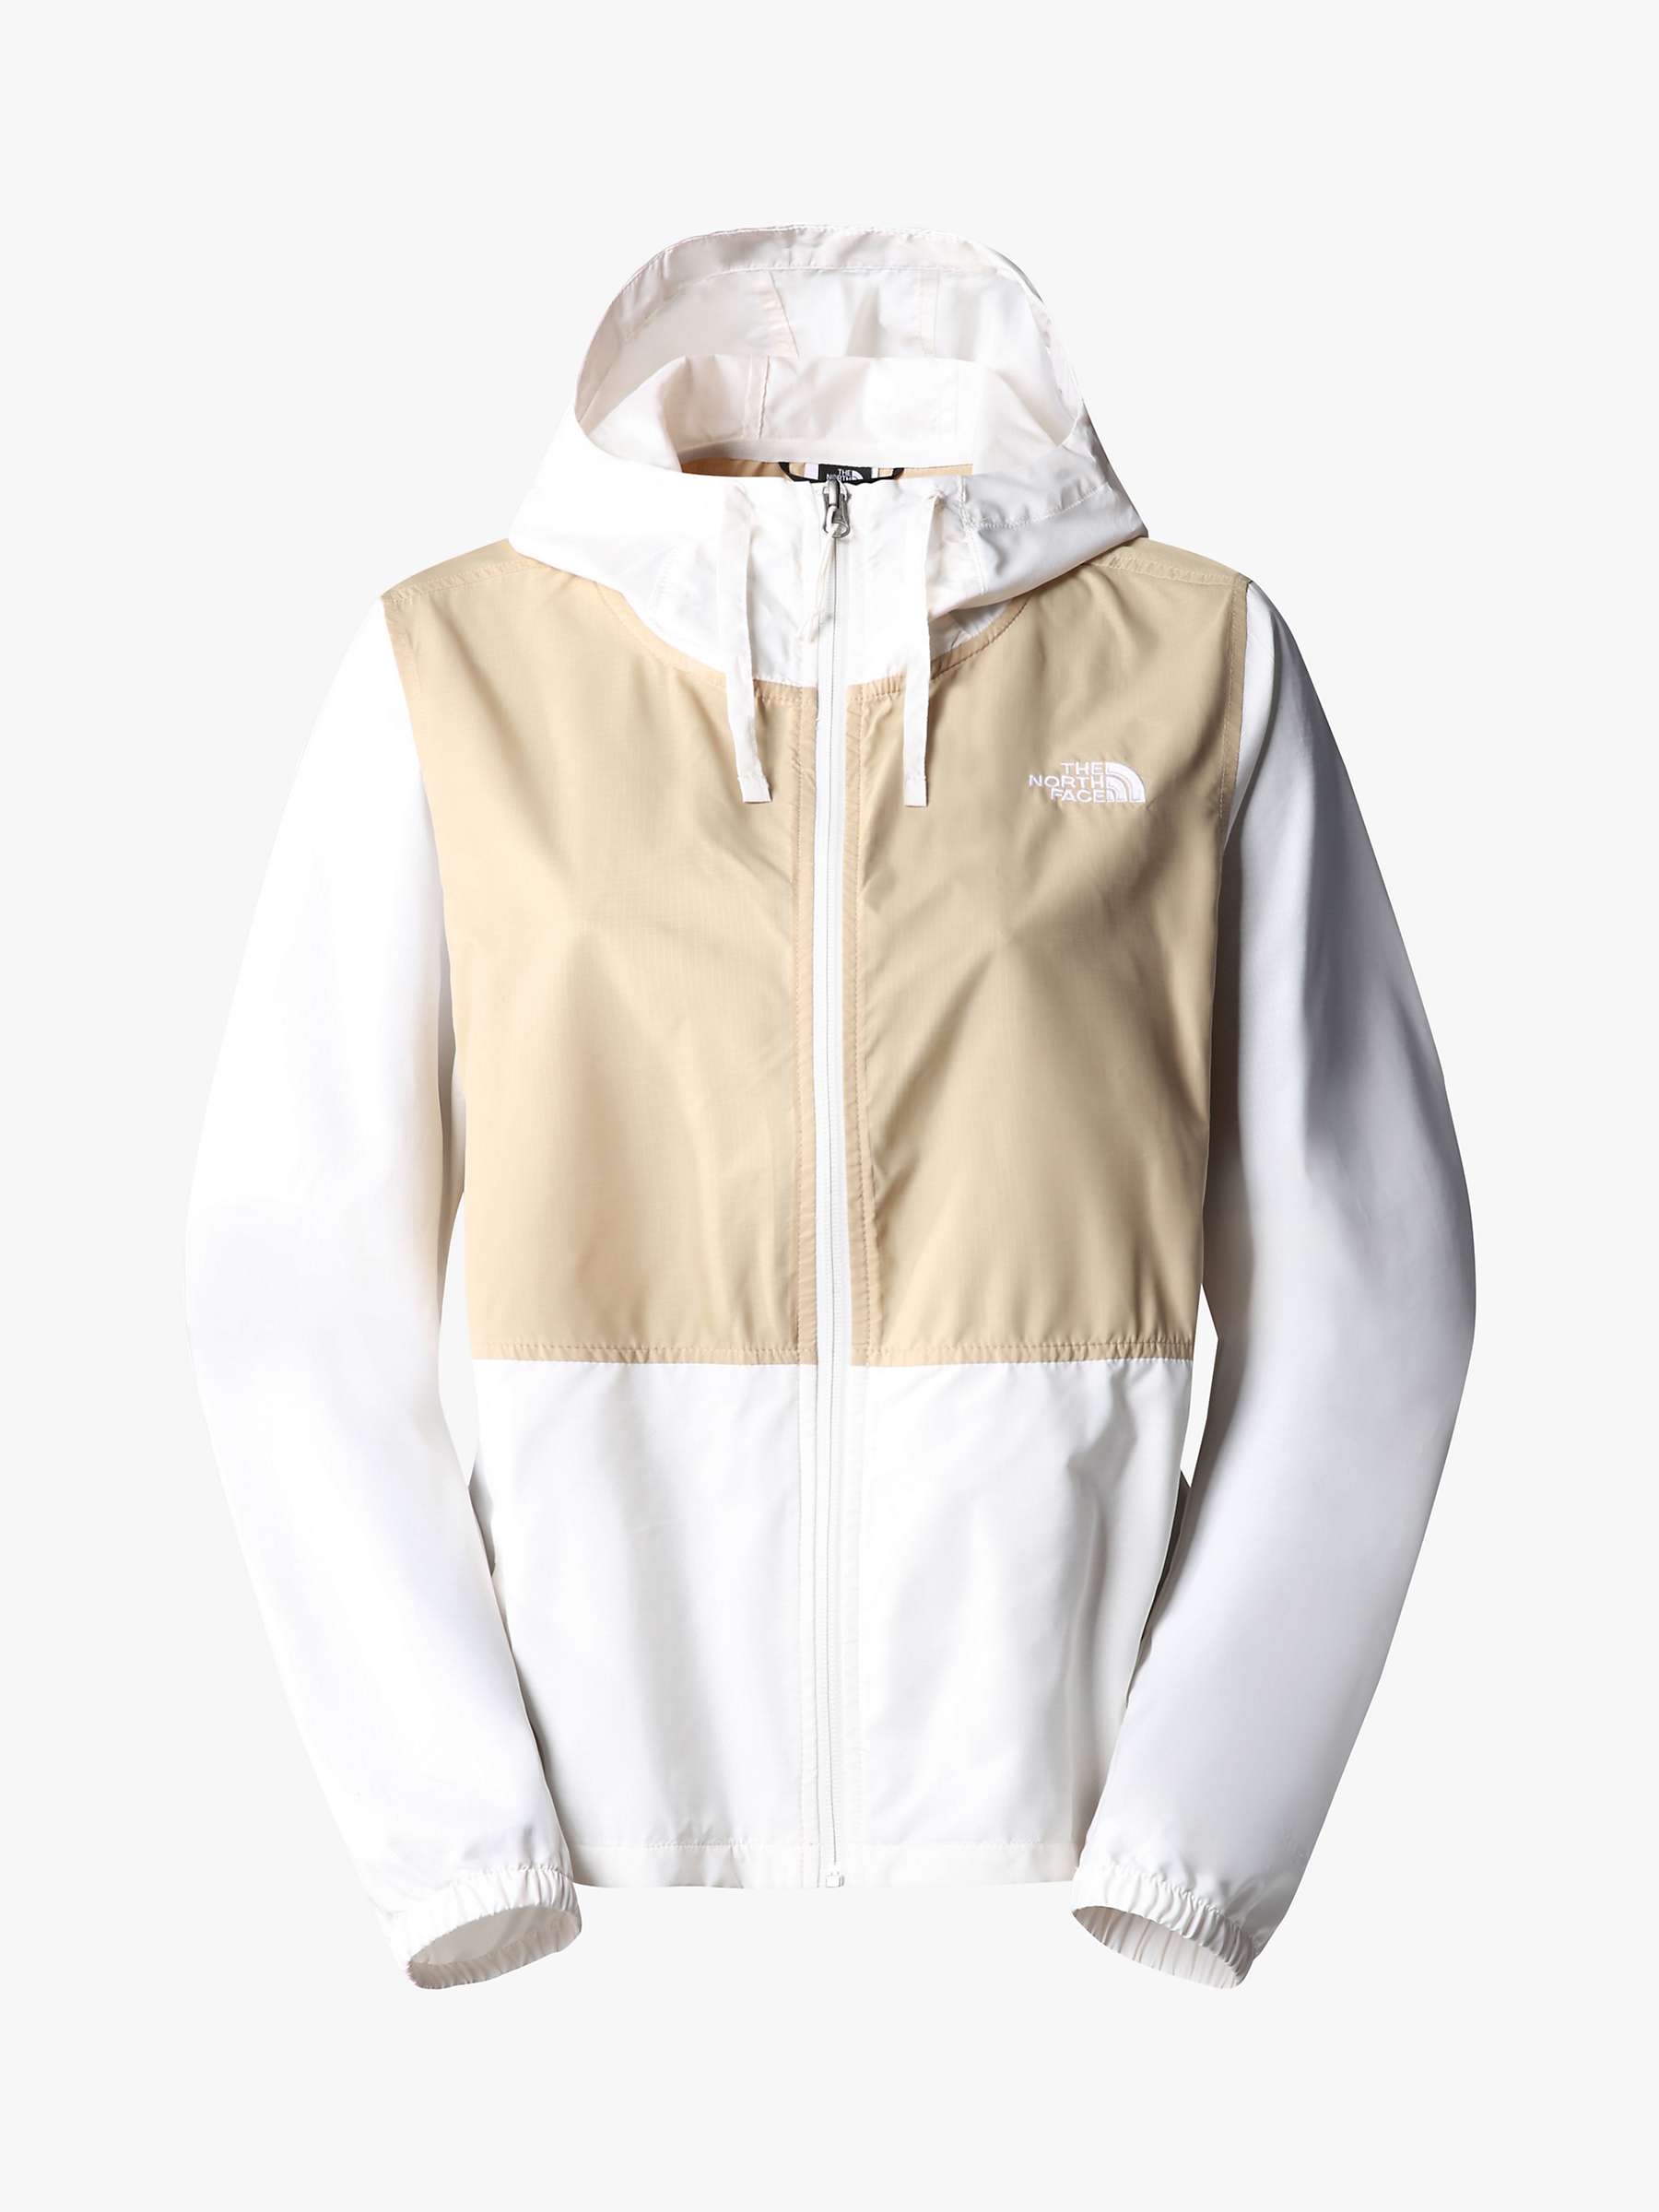 Buy The North Face Women's Cyclone III Jacket, White/ Stone Online at johnlewis.com